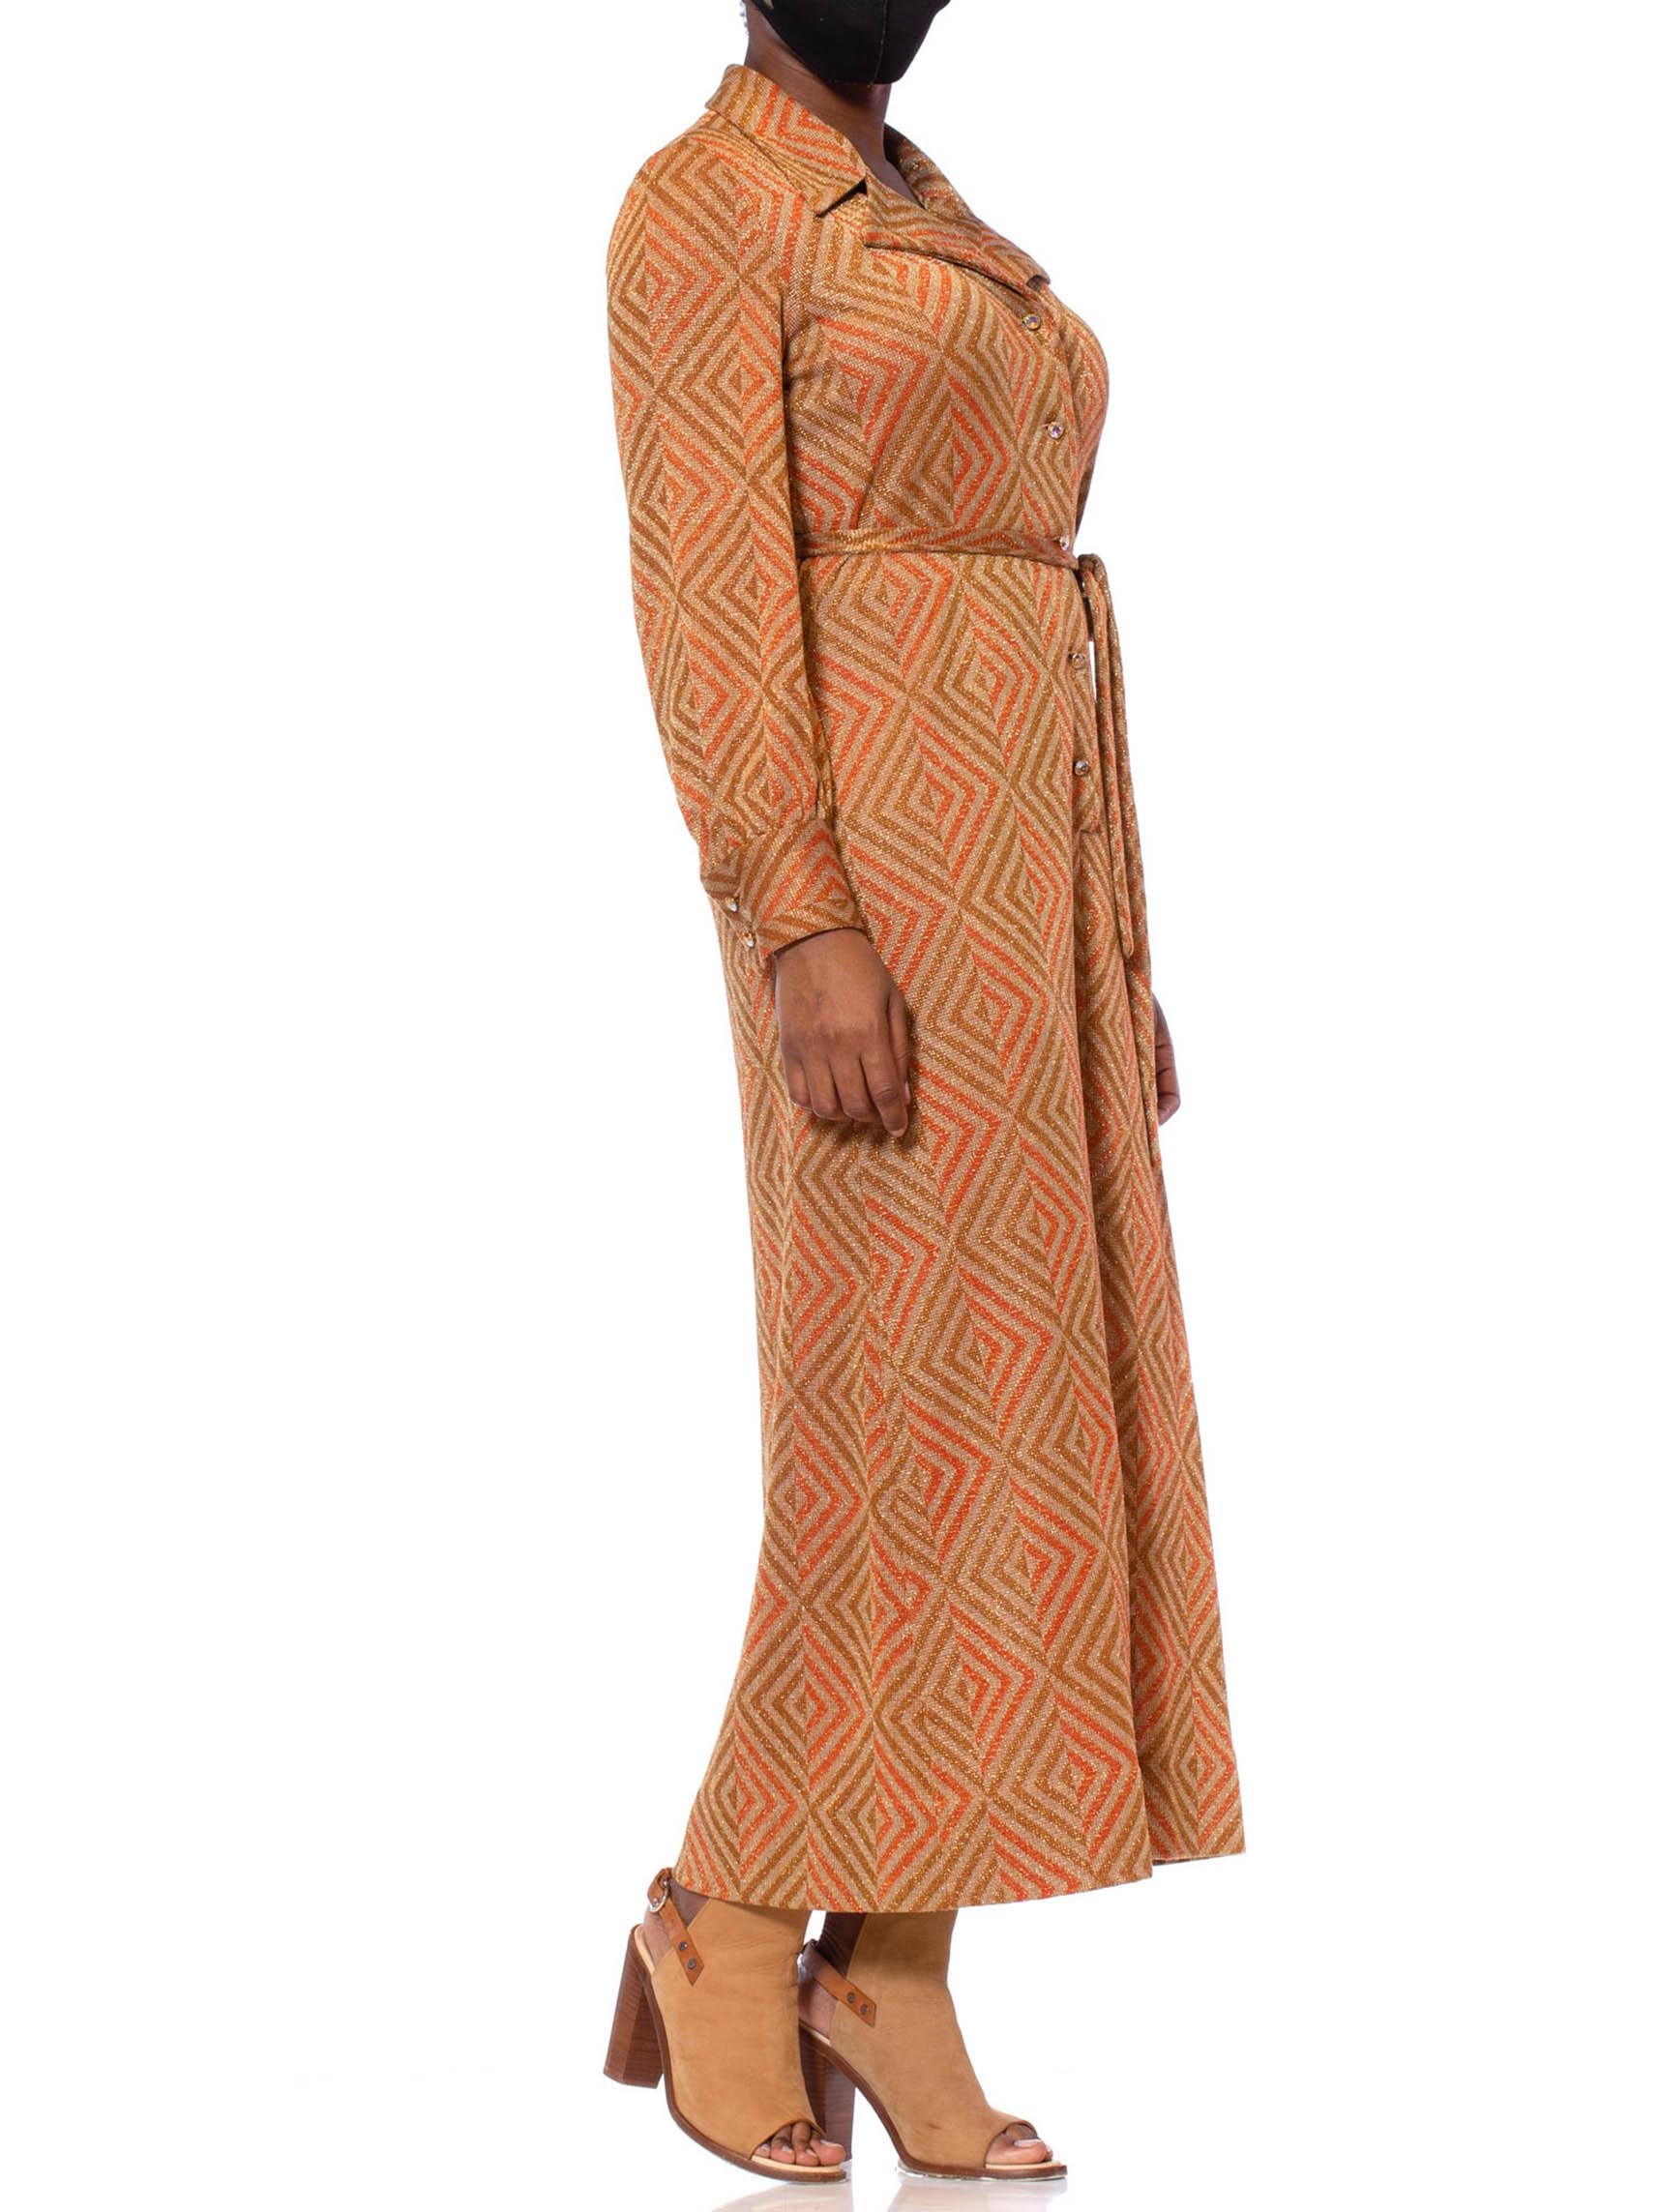 Women's 1970S Cinnamon Brown & Orange Poly/Lurex Double Knit Long Sleeved Maxi Cocktail